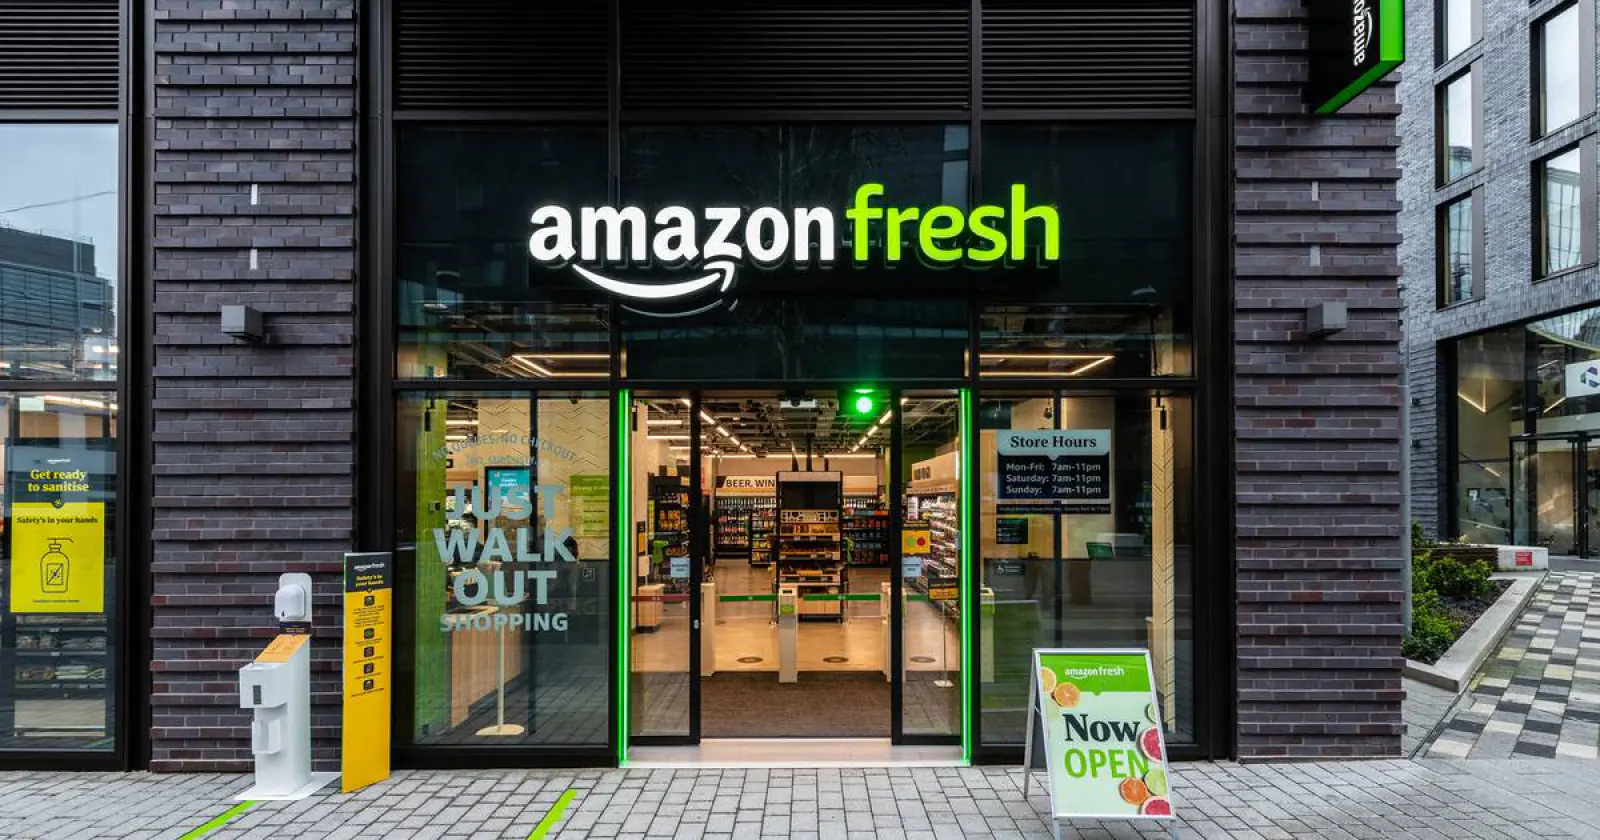 Amazon Fresh is now available in 130+ cities, as announced by Amazon India